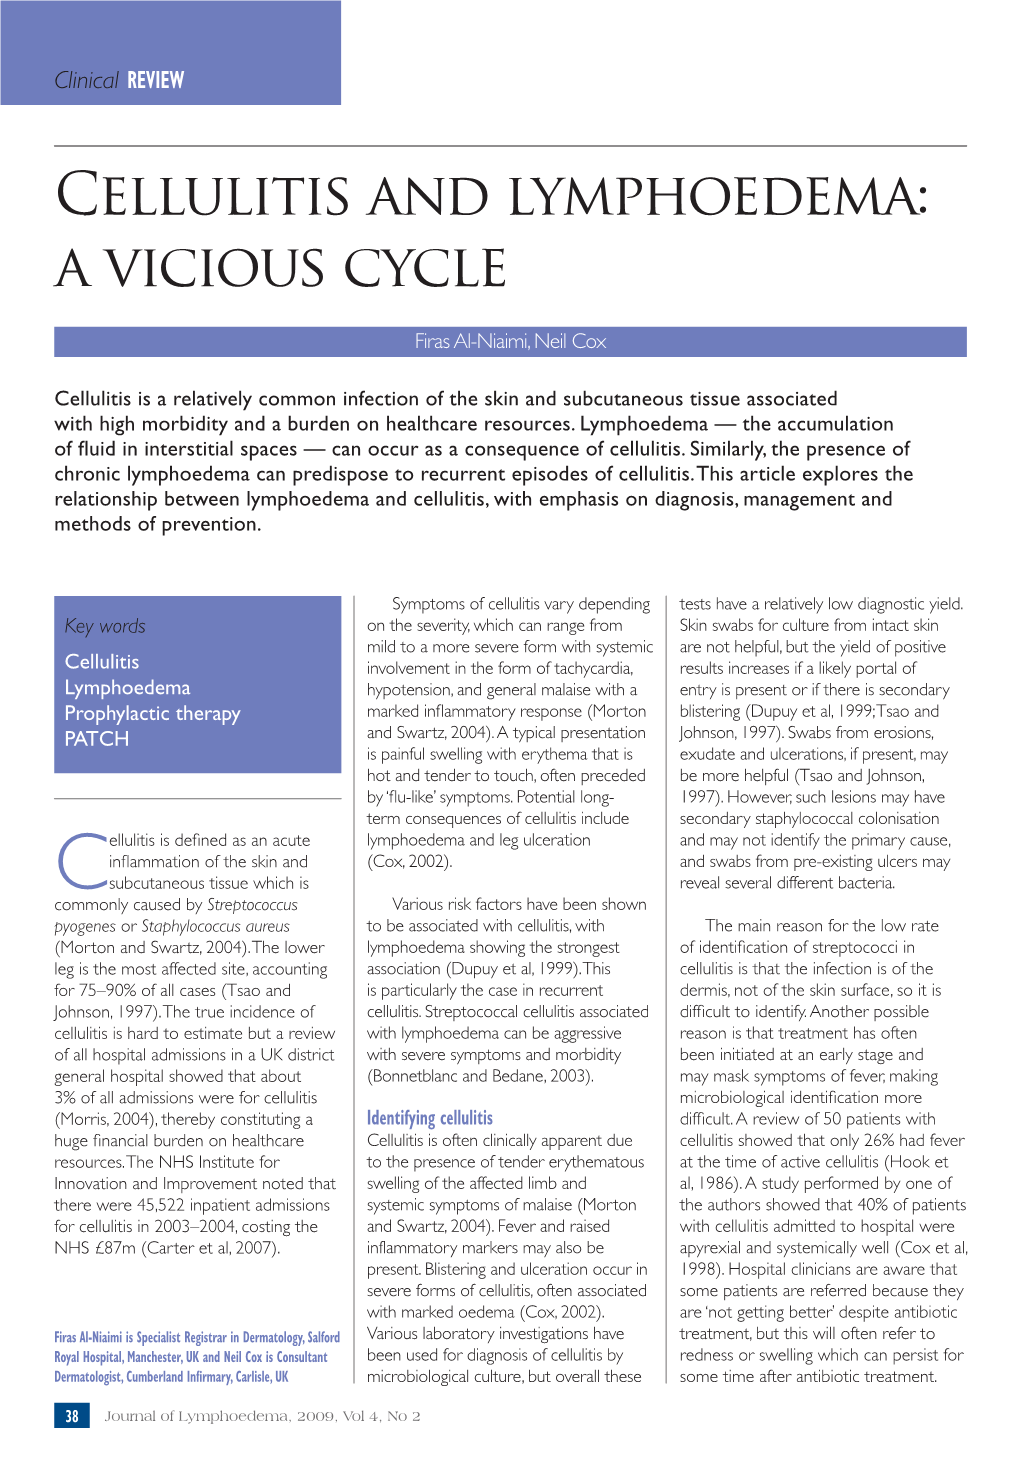 Cellulitis and Lymphoedema: a Vicious Cycle